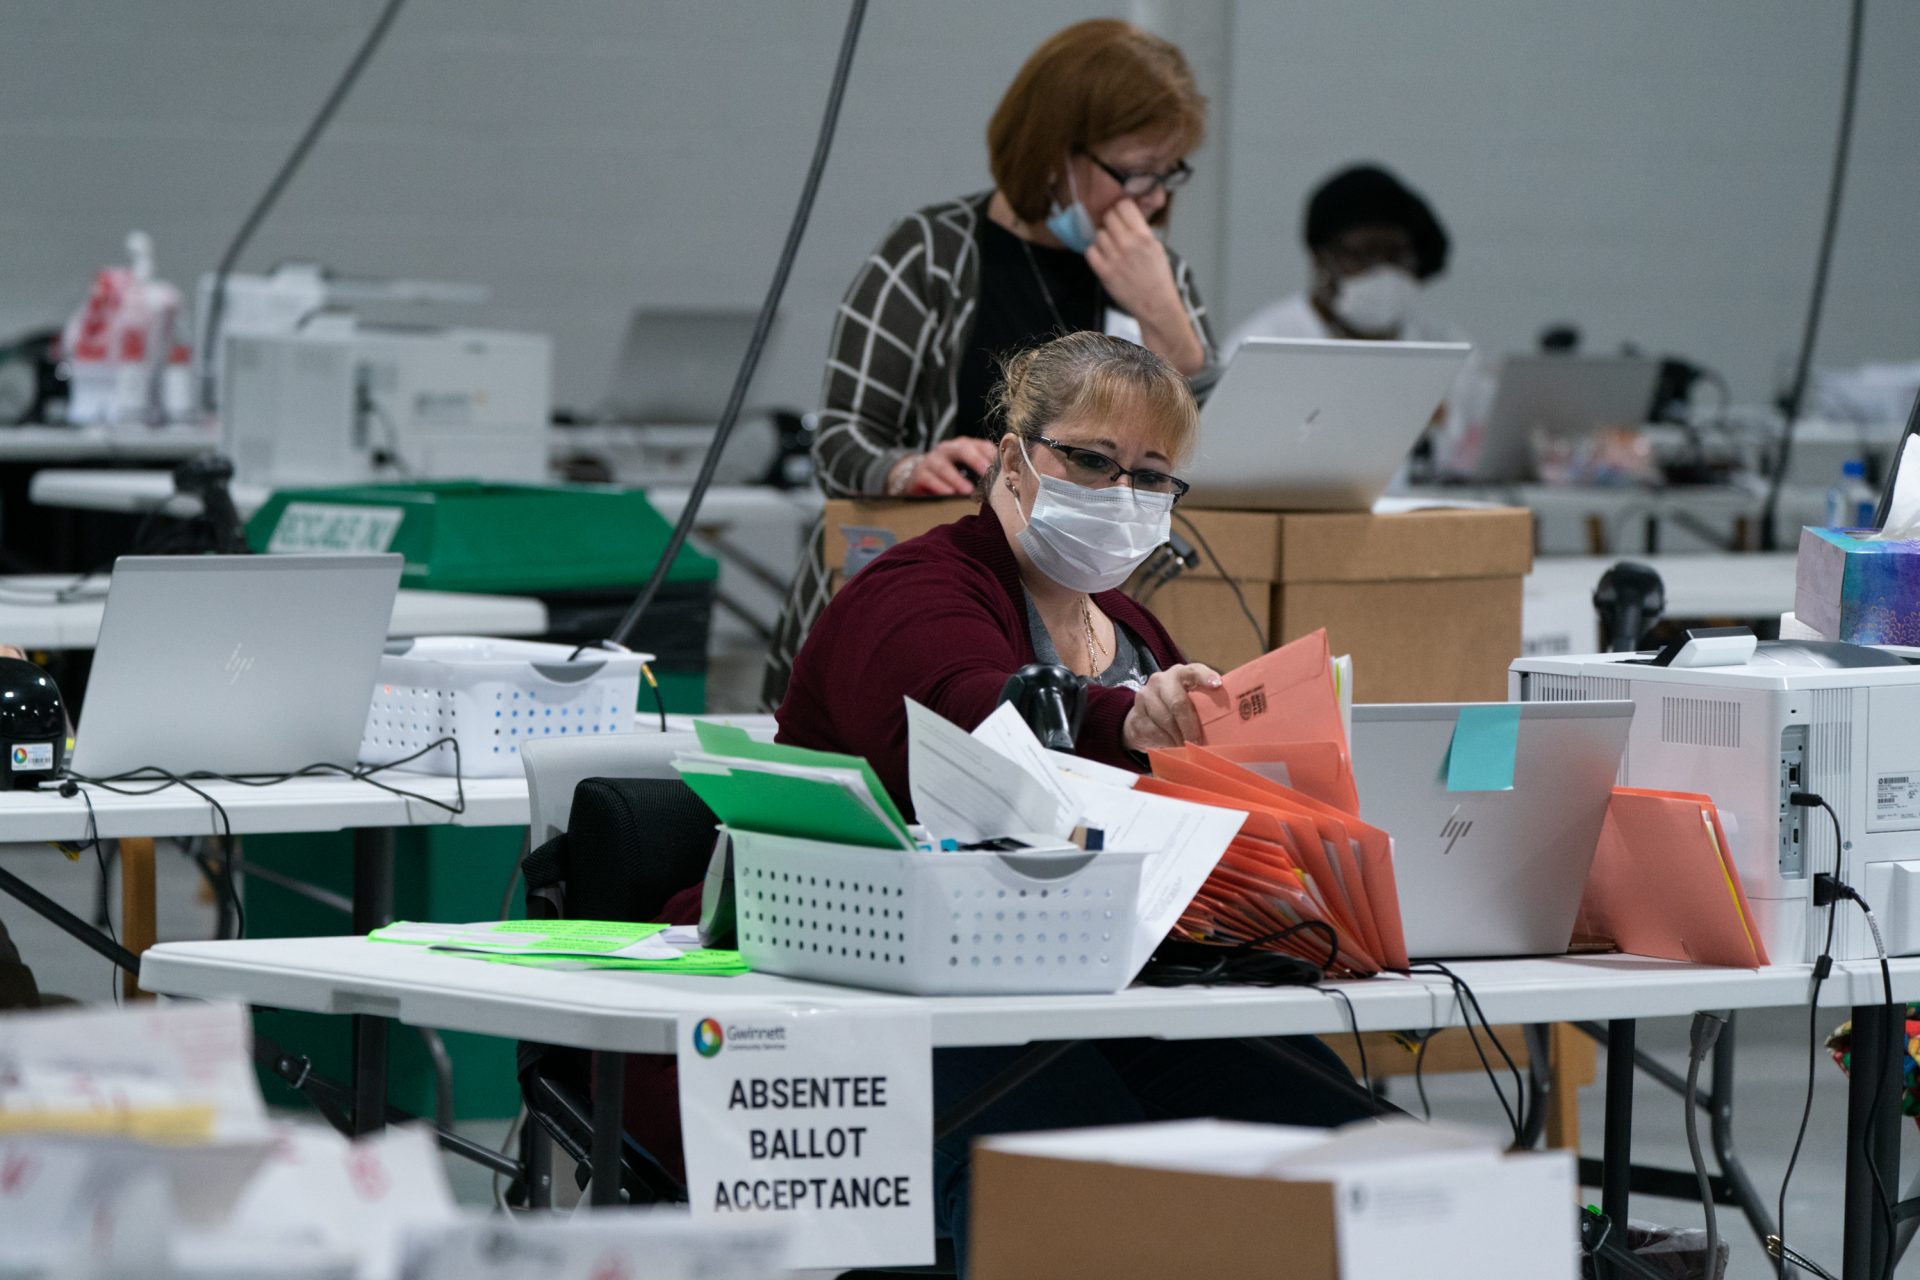 Election personnel sort ballots in preparation for an audit at the Gwinnett County Board of Voter Registrations and Elections offices on November 7, 2020 in Lawrenceville, Ga. President Trump's attempt at legal action to contest the results of the election have so far been mostly unsuccessful.